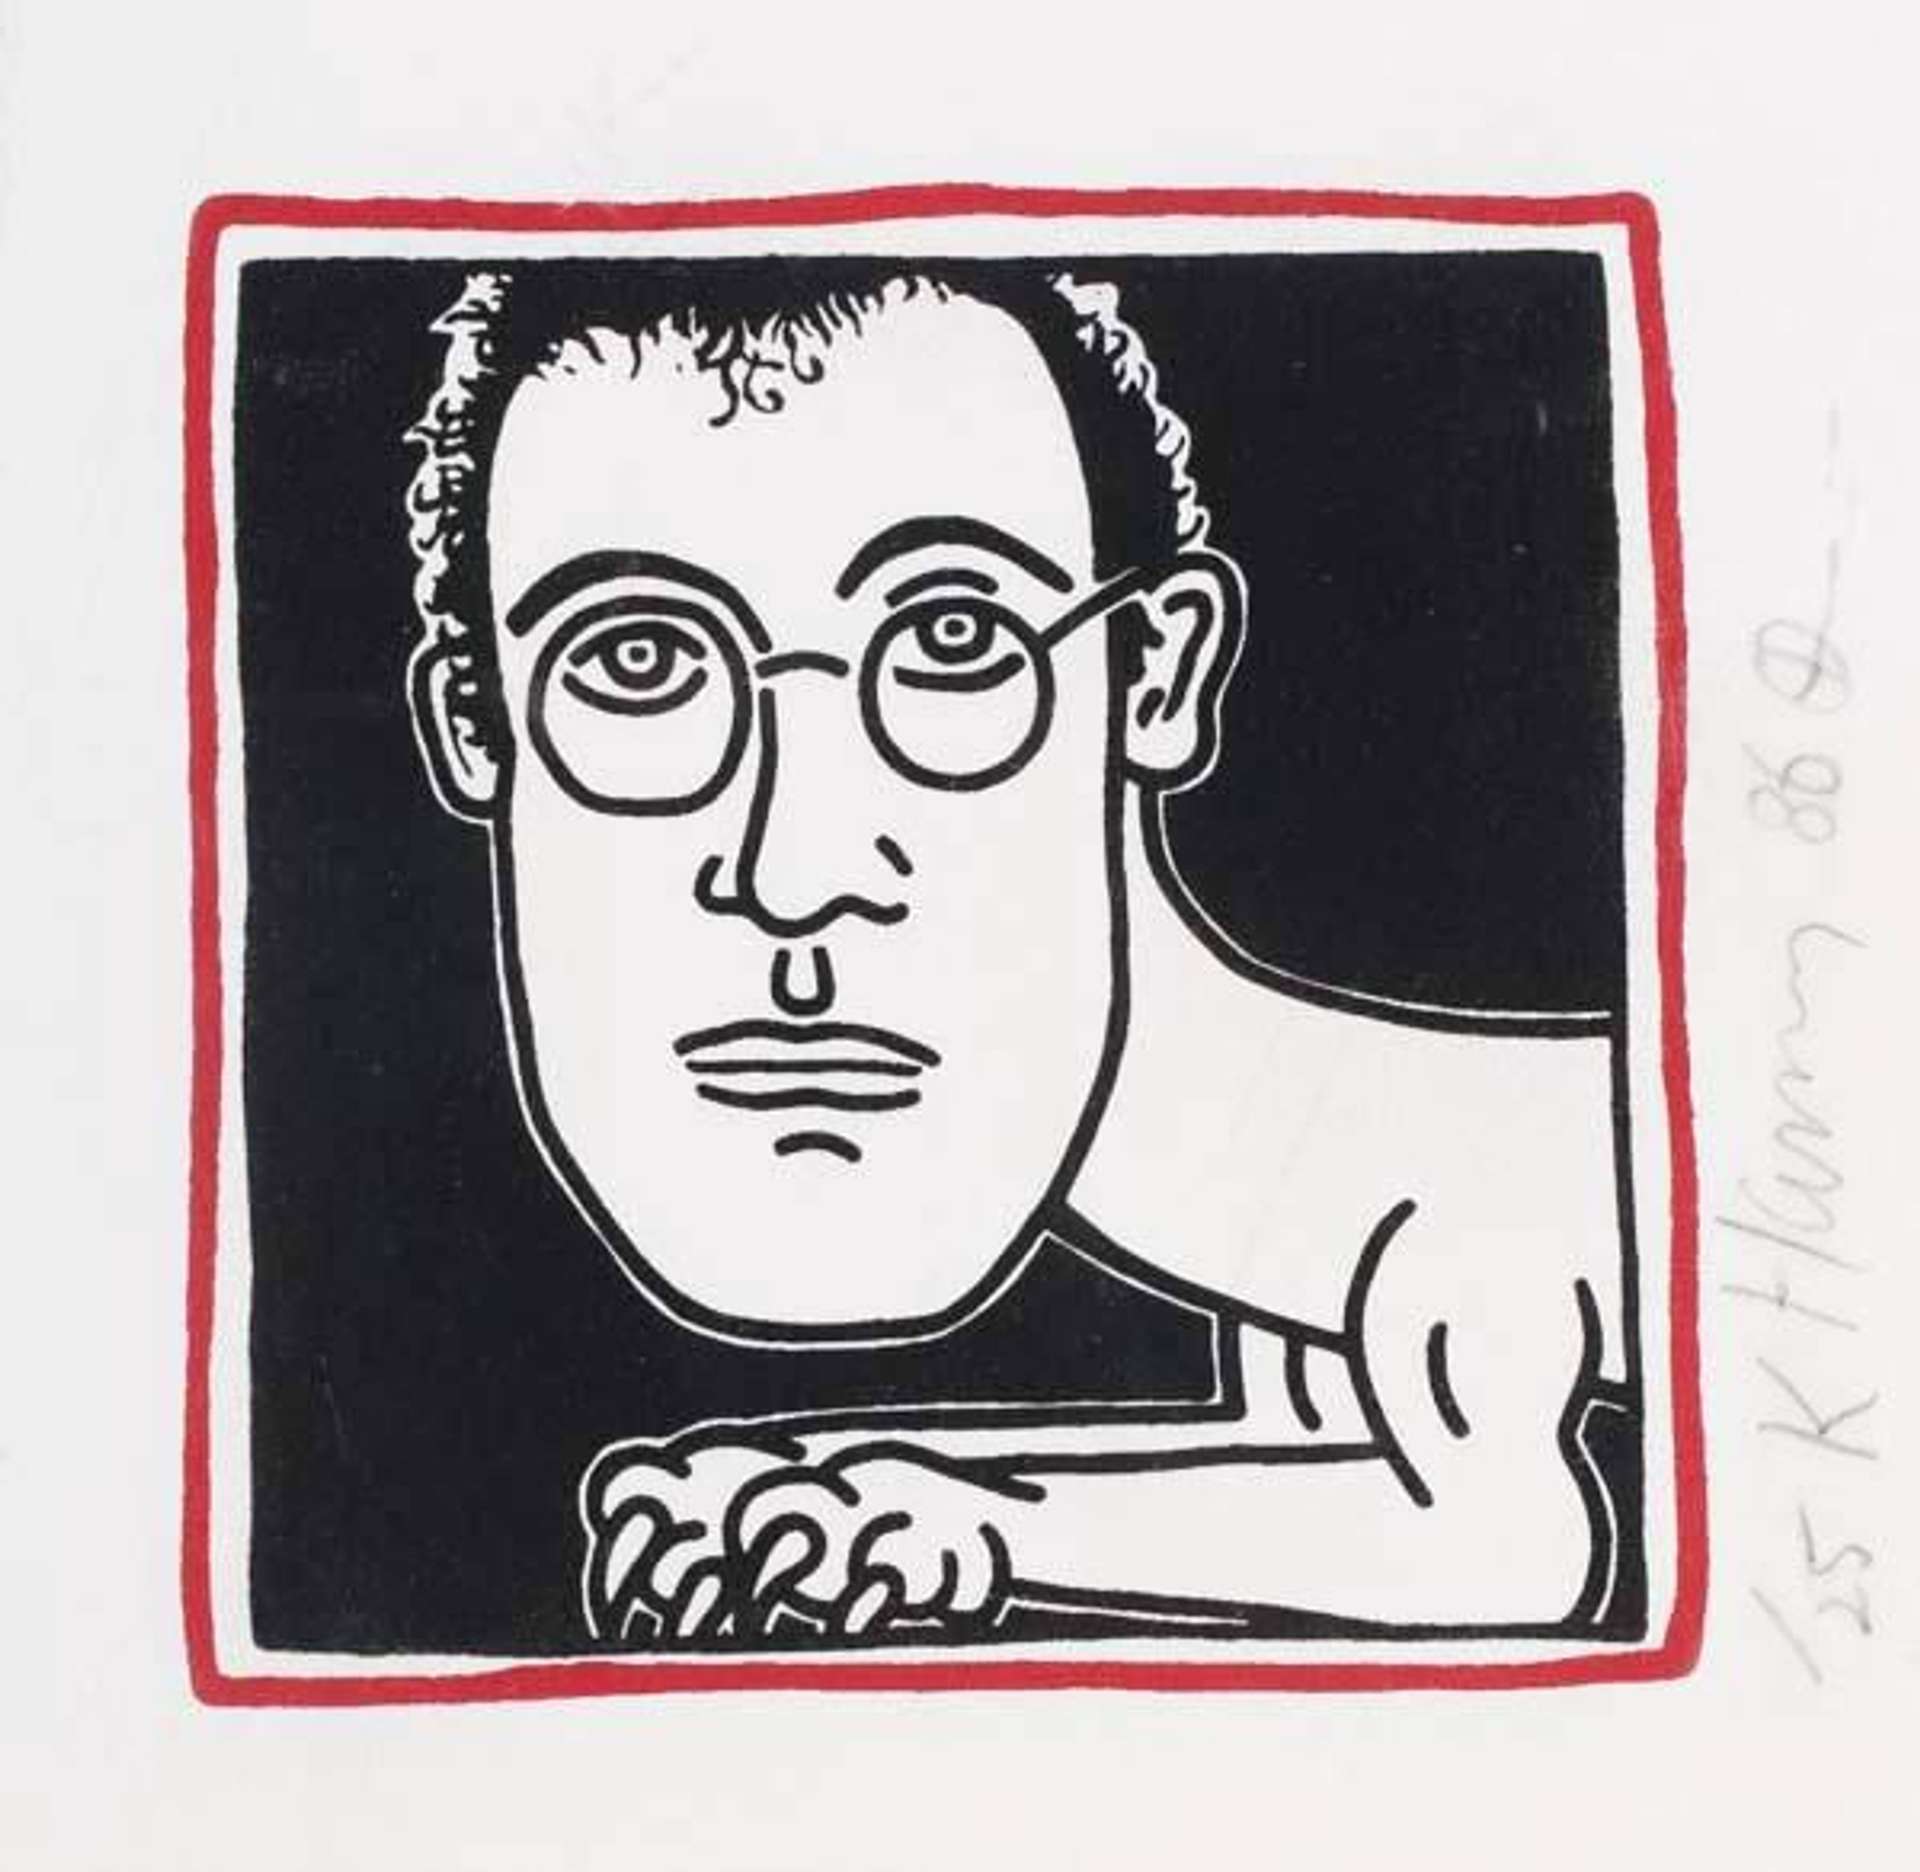 Self Portrait is an amusing screen print from 1985 by Keith Haring that shows a surreal depiction of the artist himself in his characteristic linear style. Haring’s face forms the central focus of the image, but it is unusual that this portrait shows the artist’s head attached to the body of an animal with sharp claws.